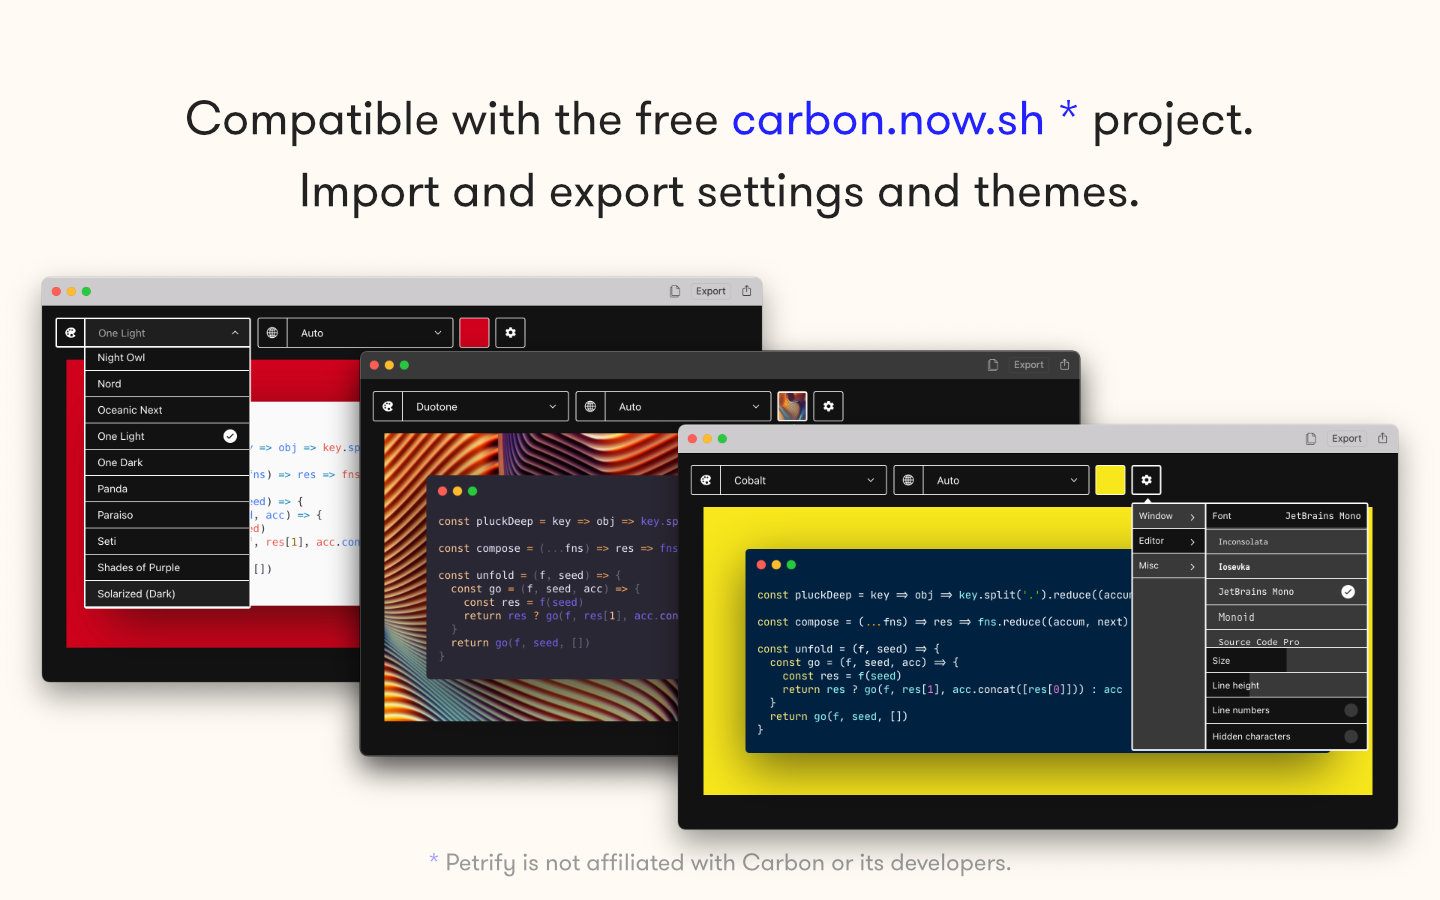 App Store images showing several screenshots of Petrify's editor with caption: Leverages the highly customizable editor of carbon.now.sh